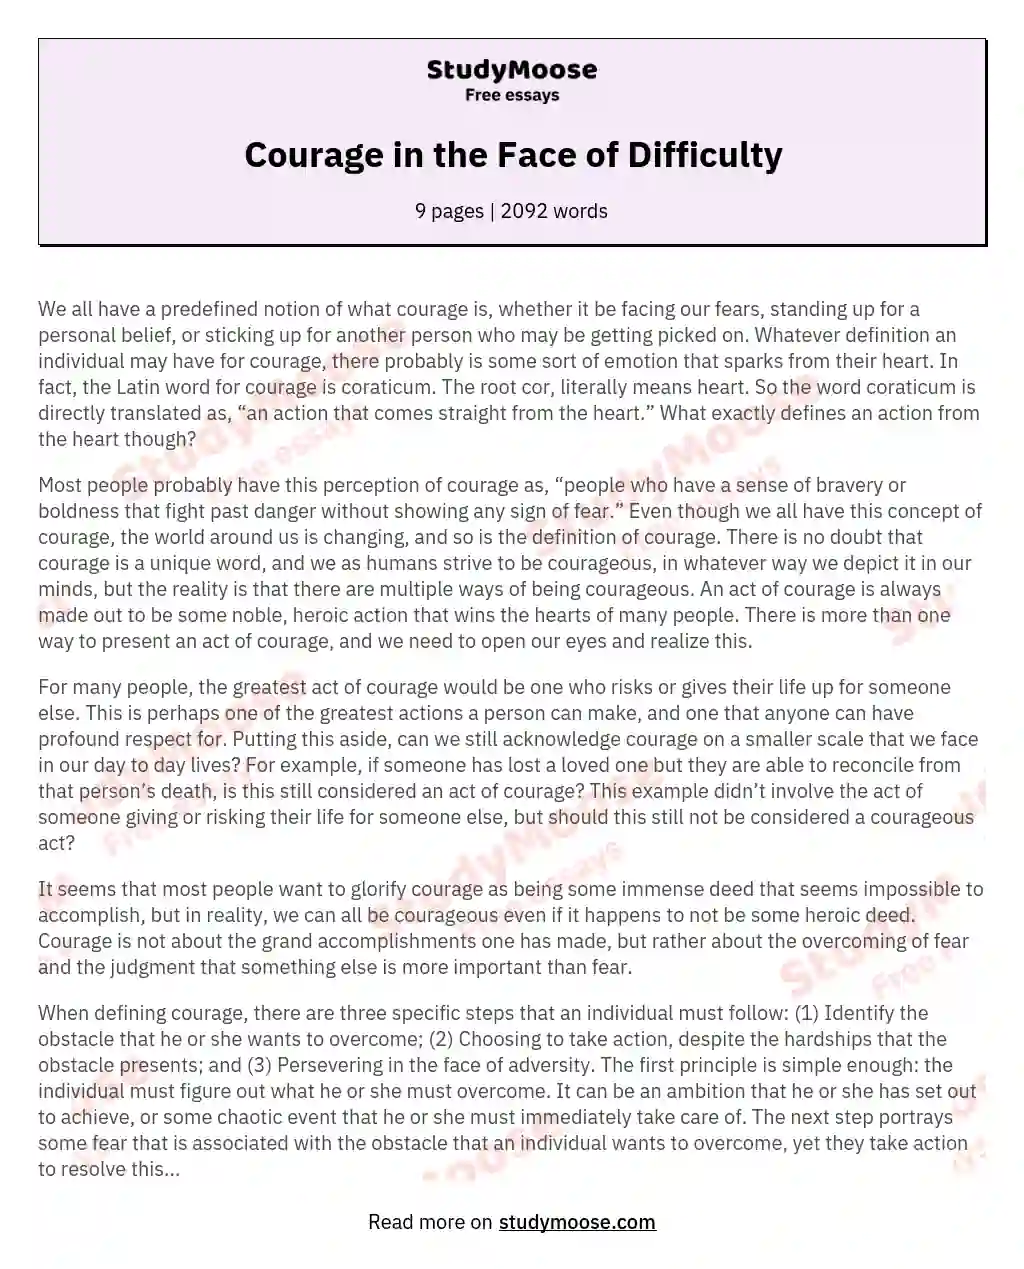 Courage in the Face of Difficulty essay